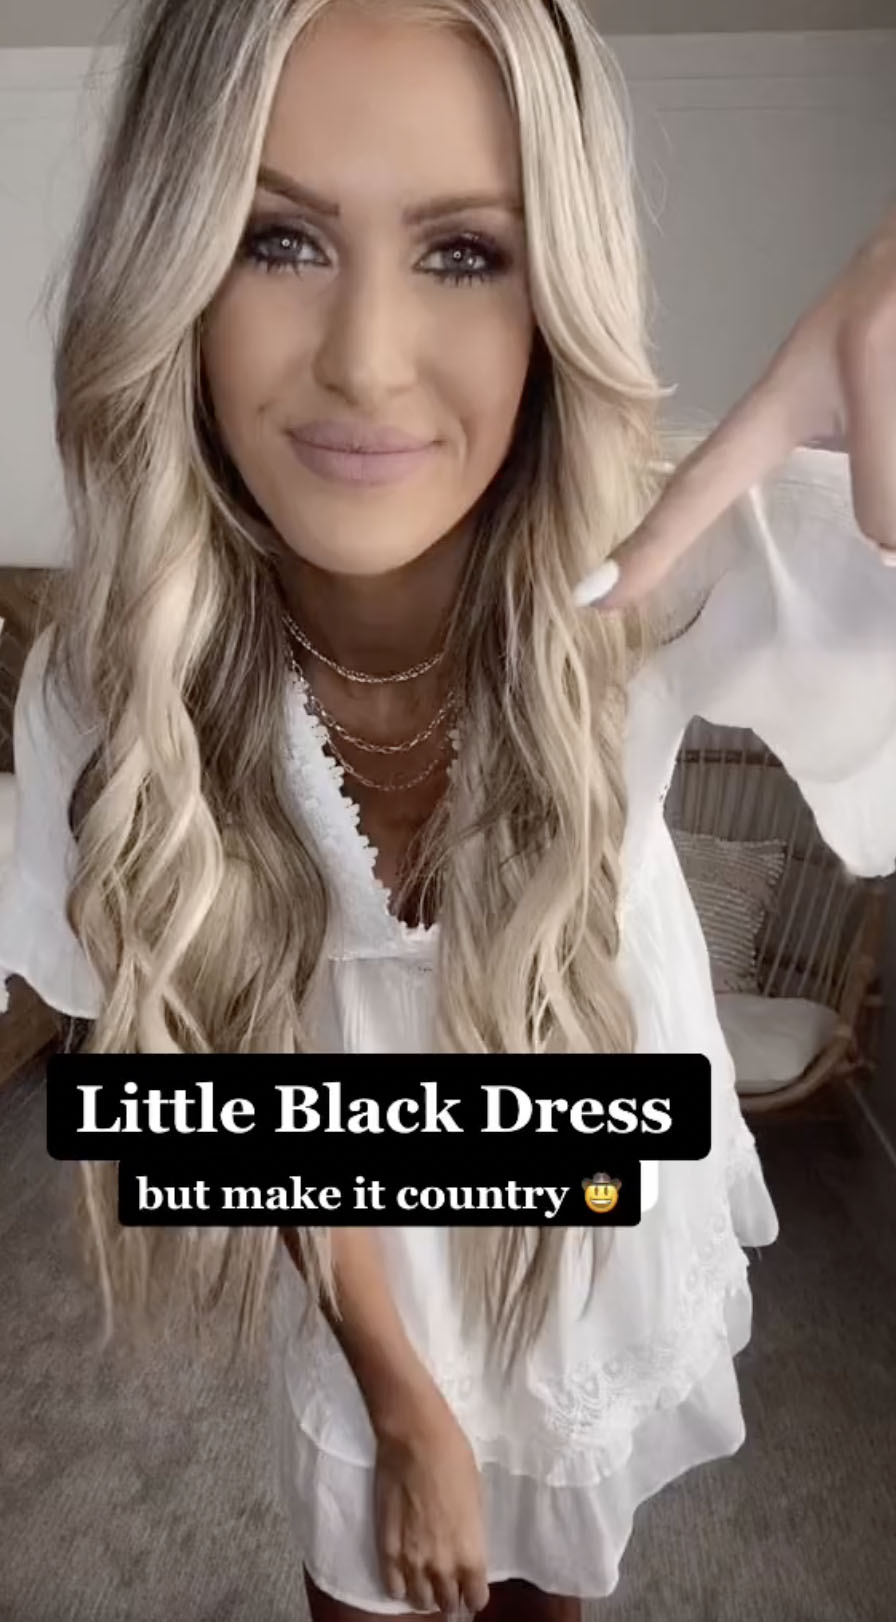 brianna kelly recommends blonde hair country girl pic